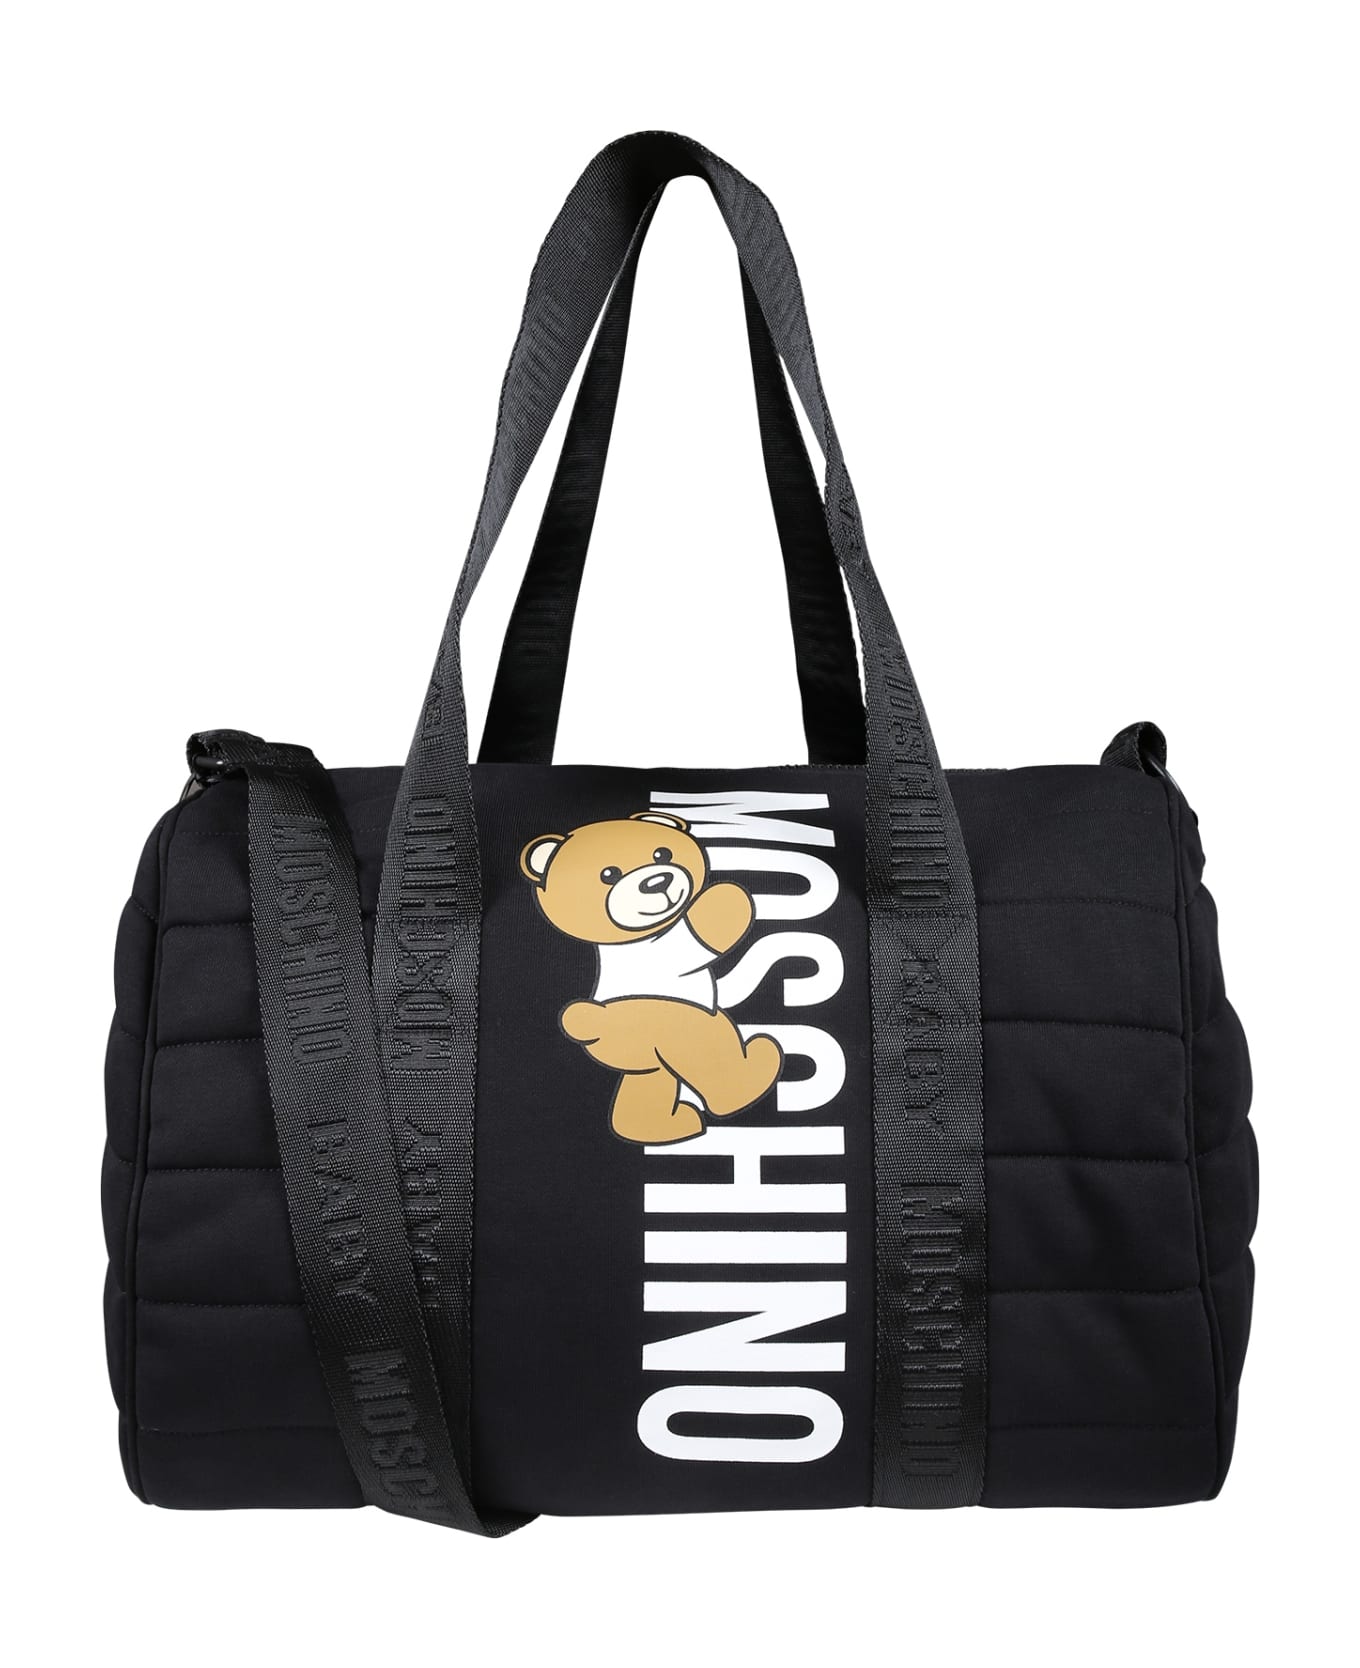 Moschino Black Changing Bag For Babykids With Teddy Bear And Logo - Black